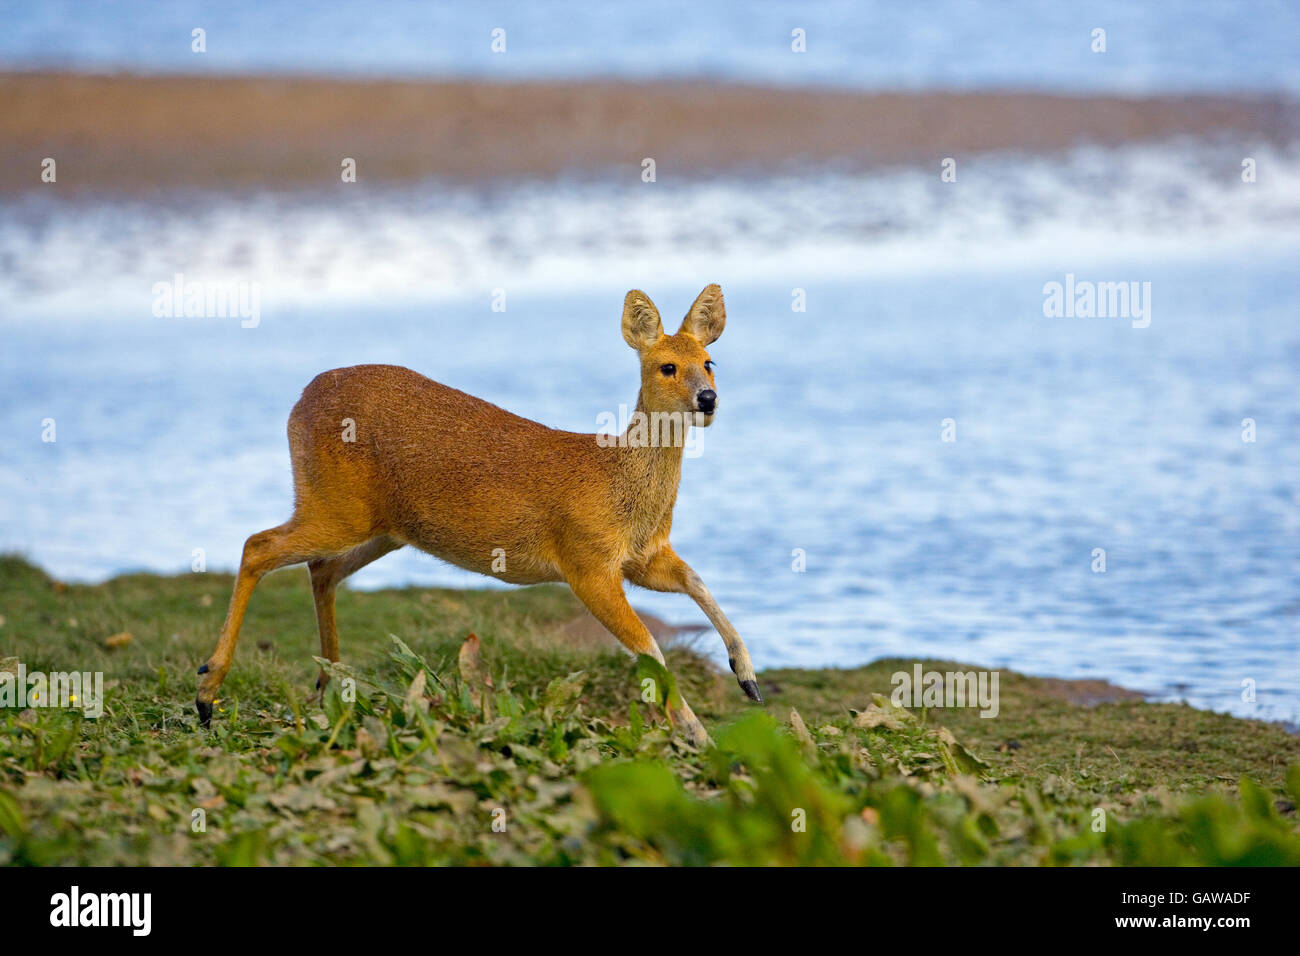 Chinese Water Deer Hydropotes inermis running on the bank of a river Stock Photo